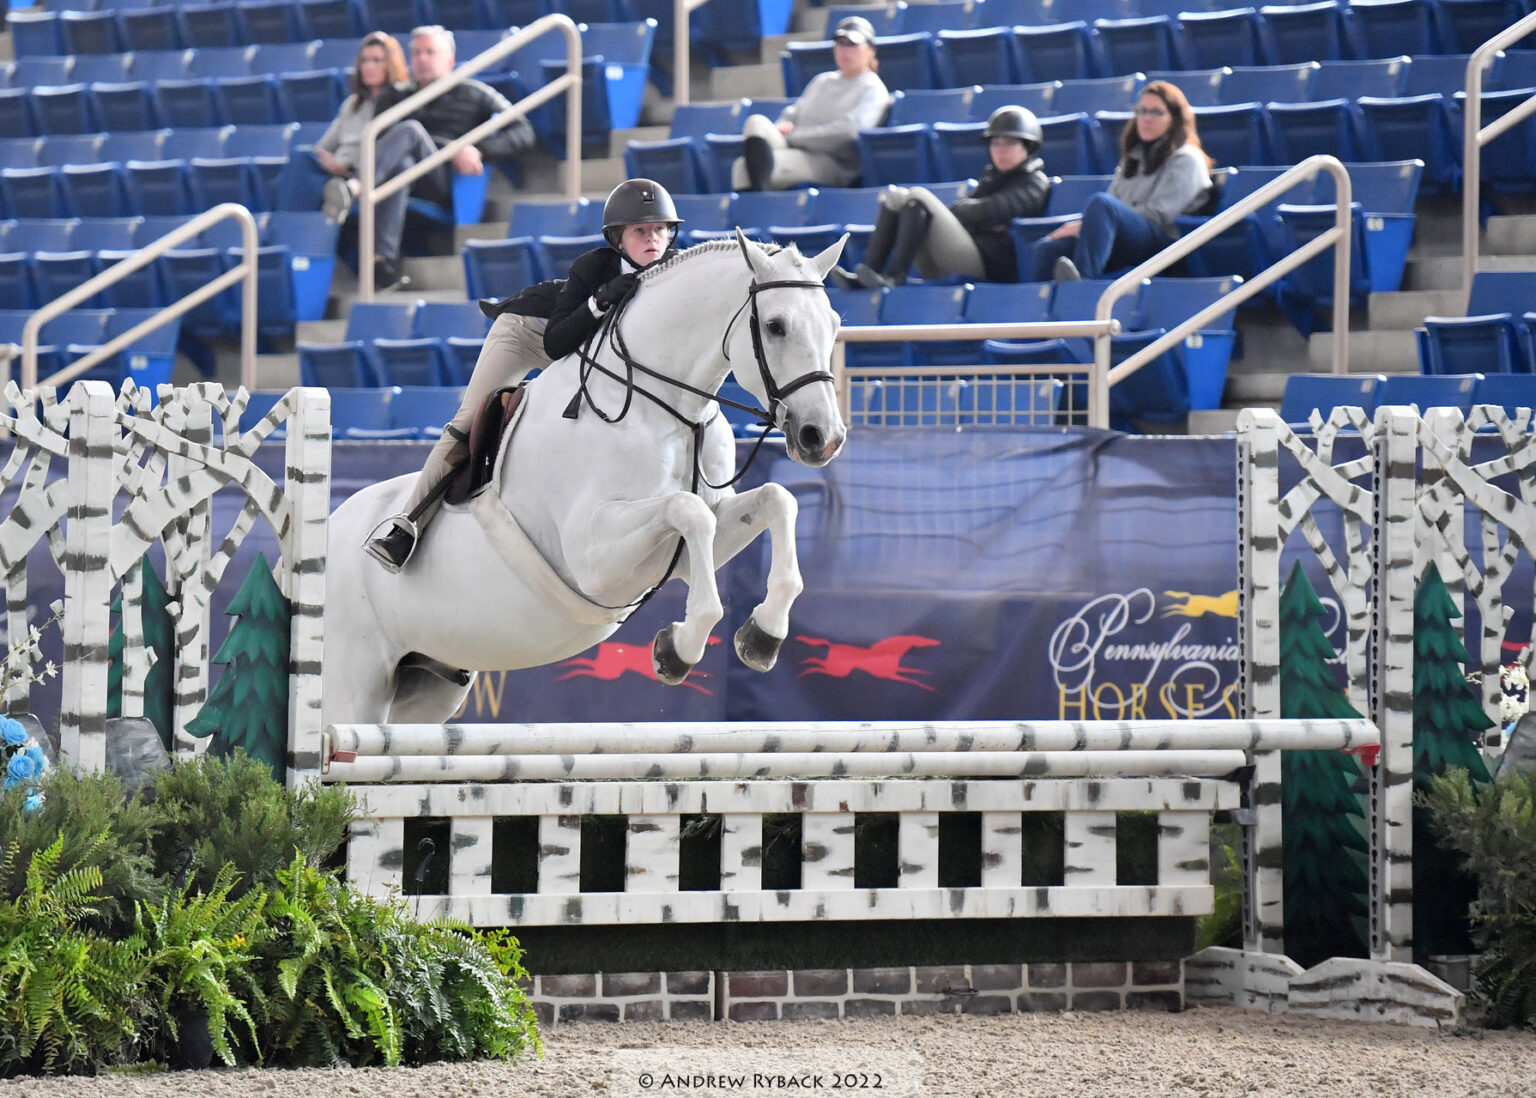 Pennsylvania National Horse Show Announces Expanded Schedule, New